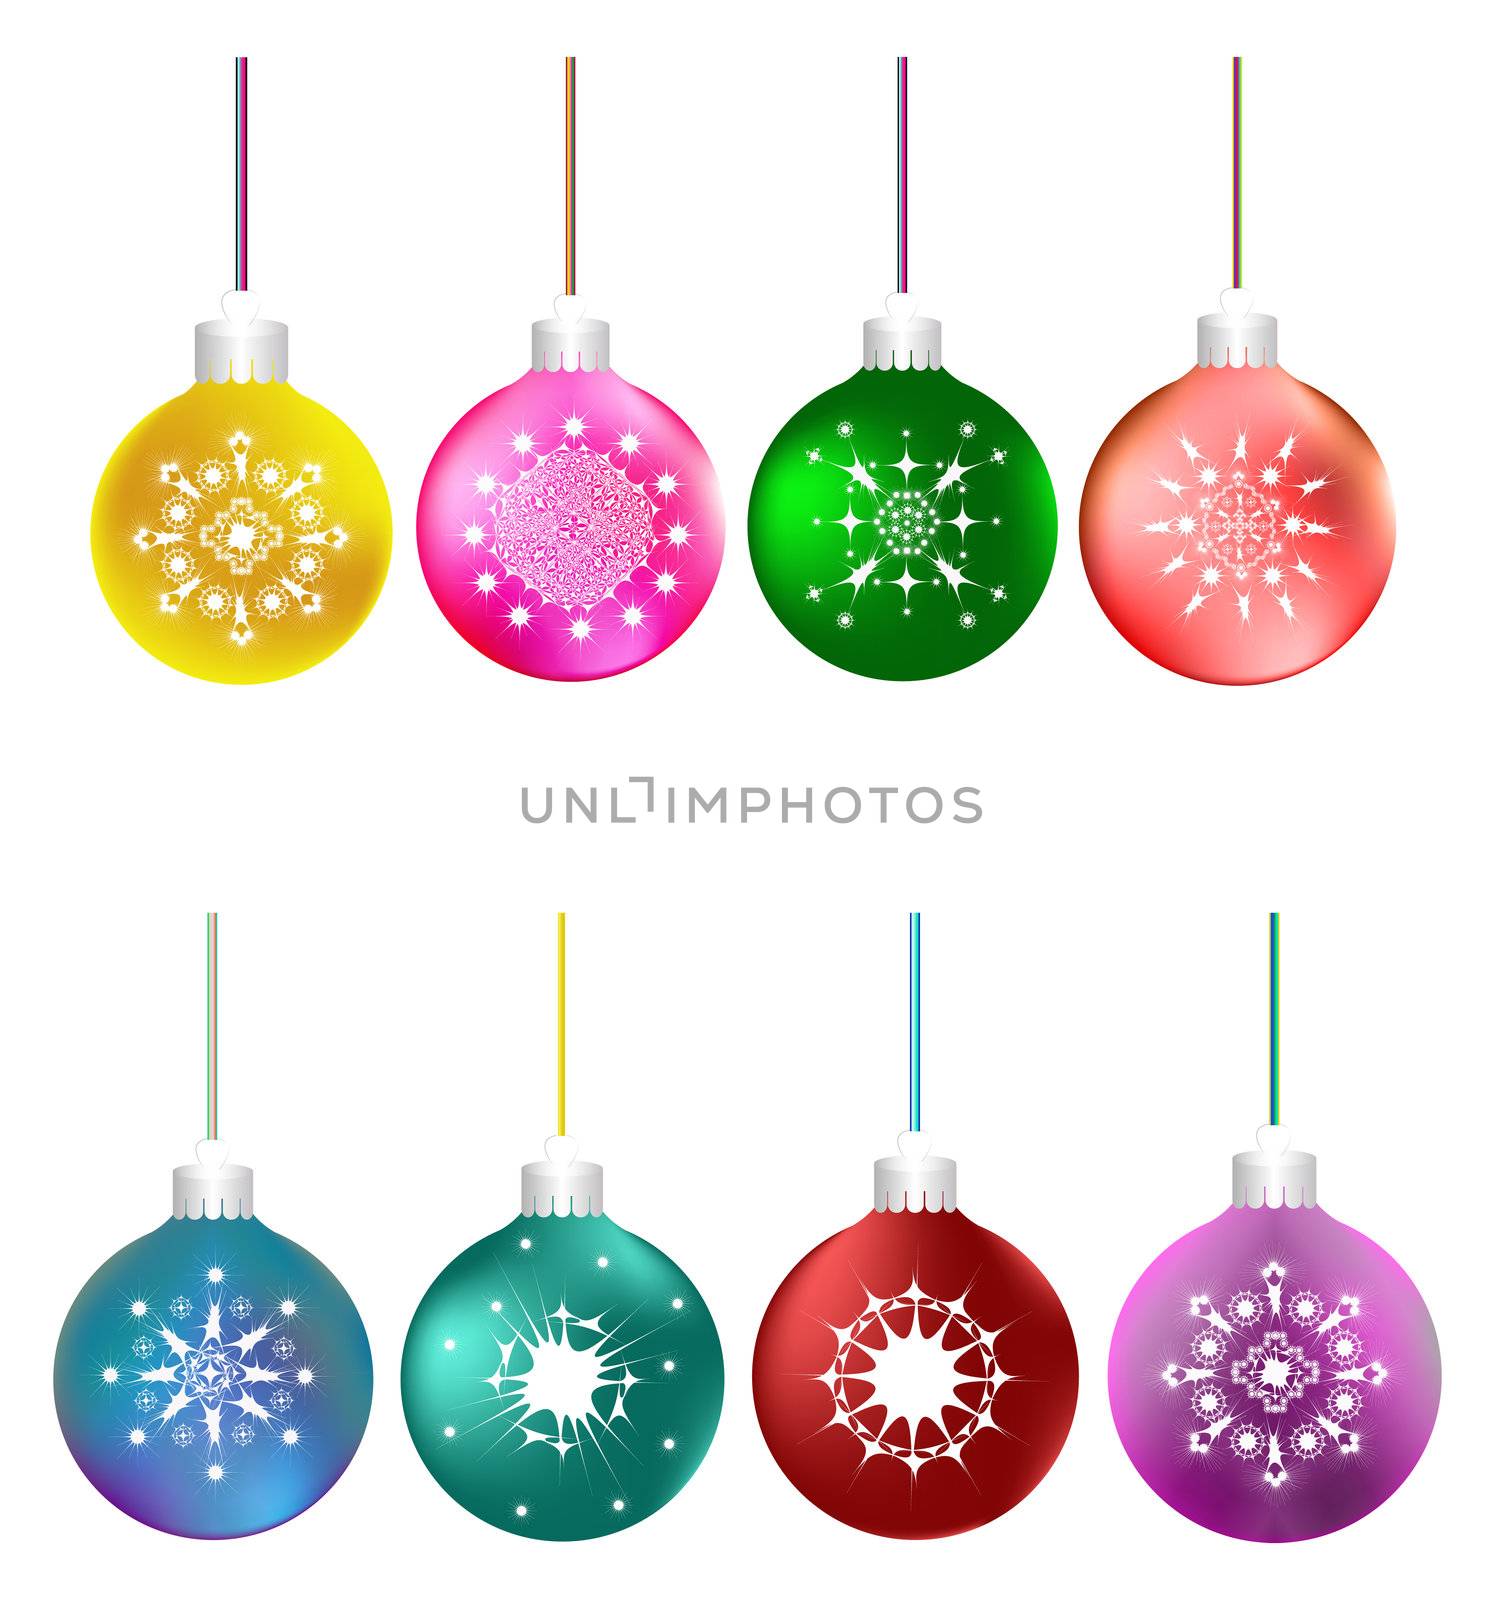 New Year's and Christmas abstract decorative elements.